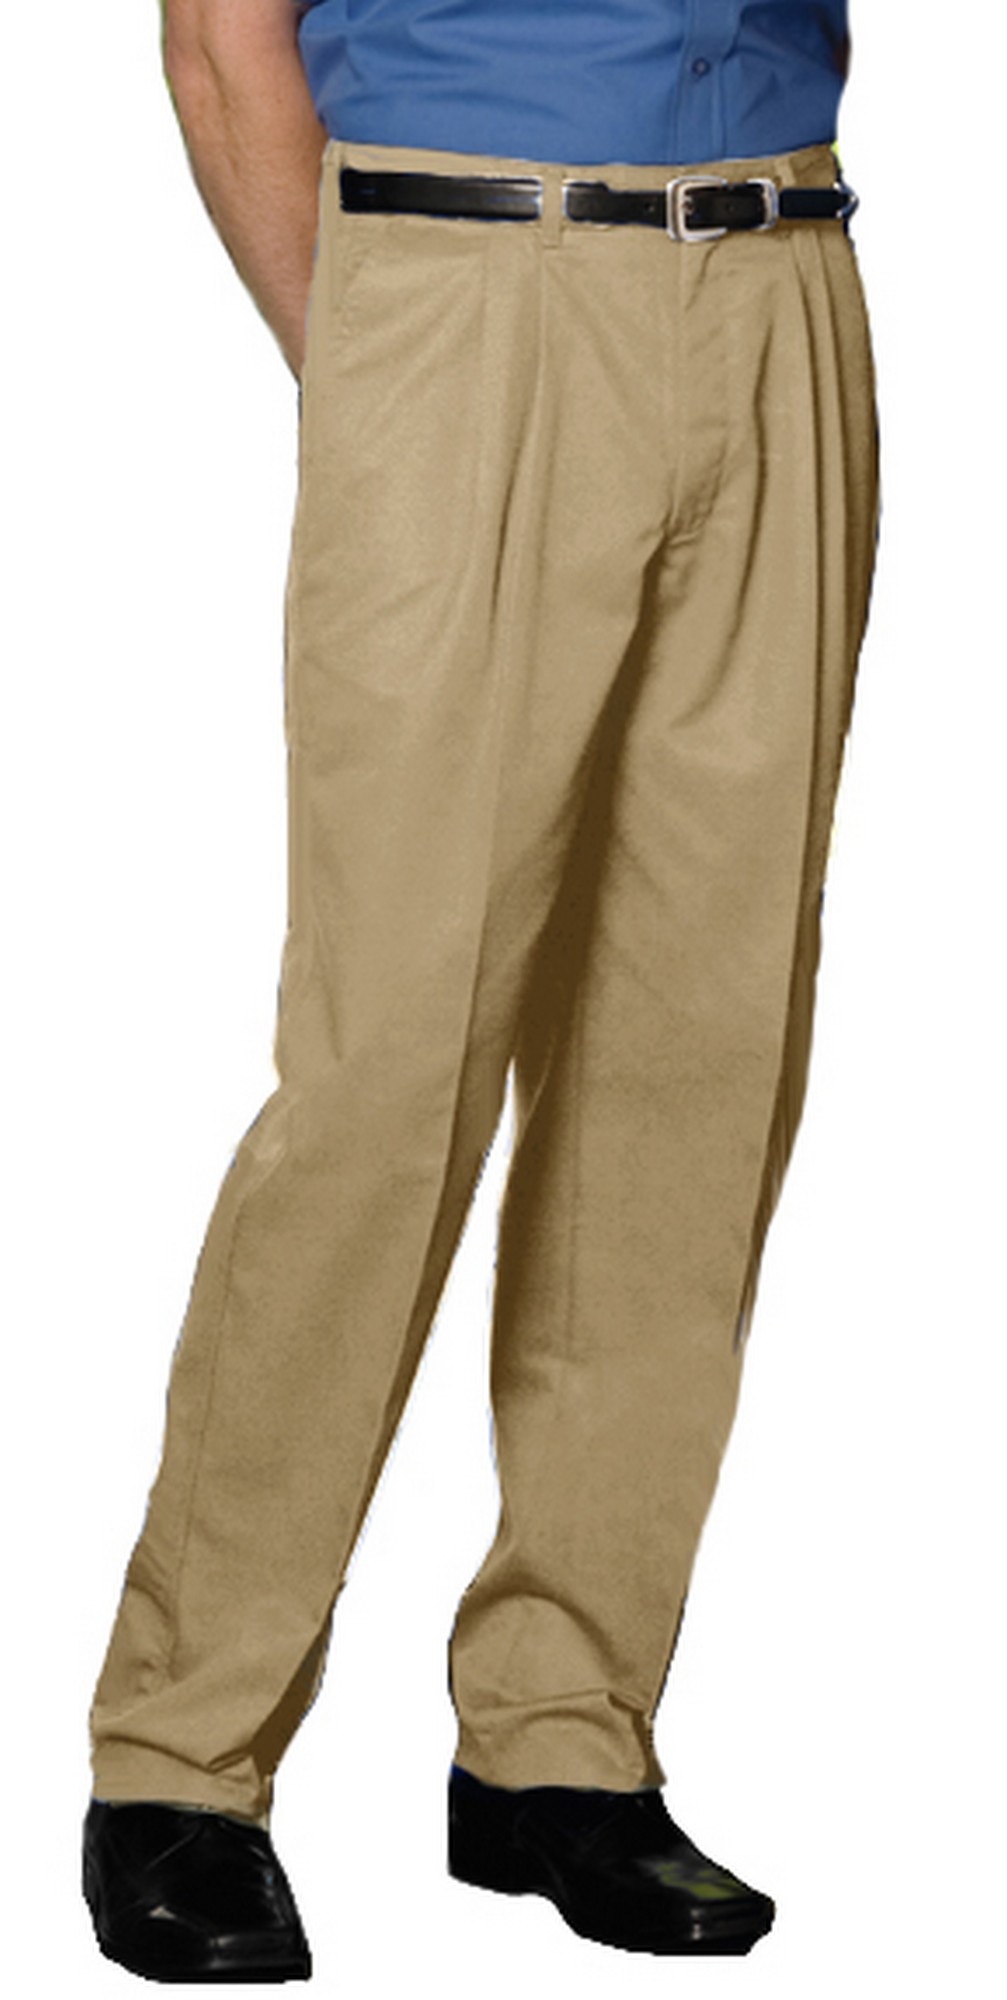 Men's Blended Chino Pleated Pant - Online Exclusive